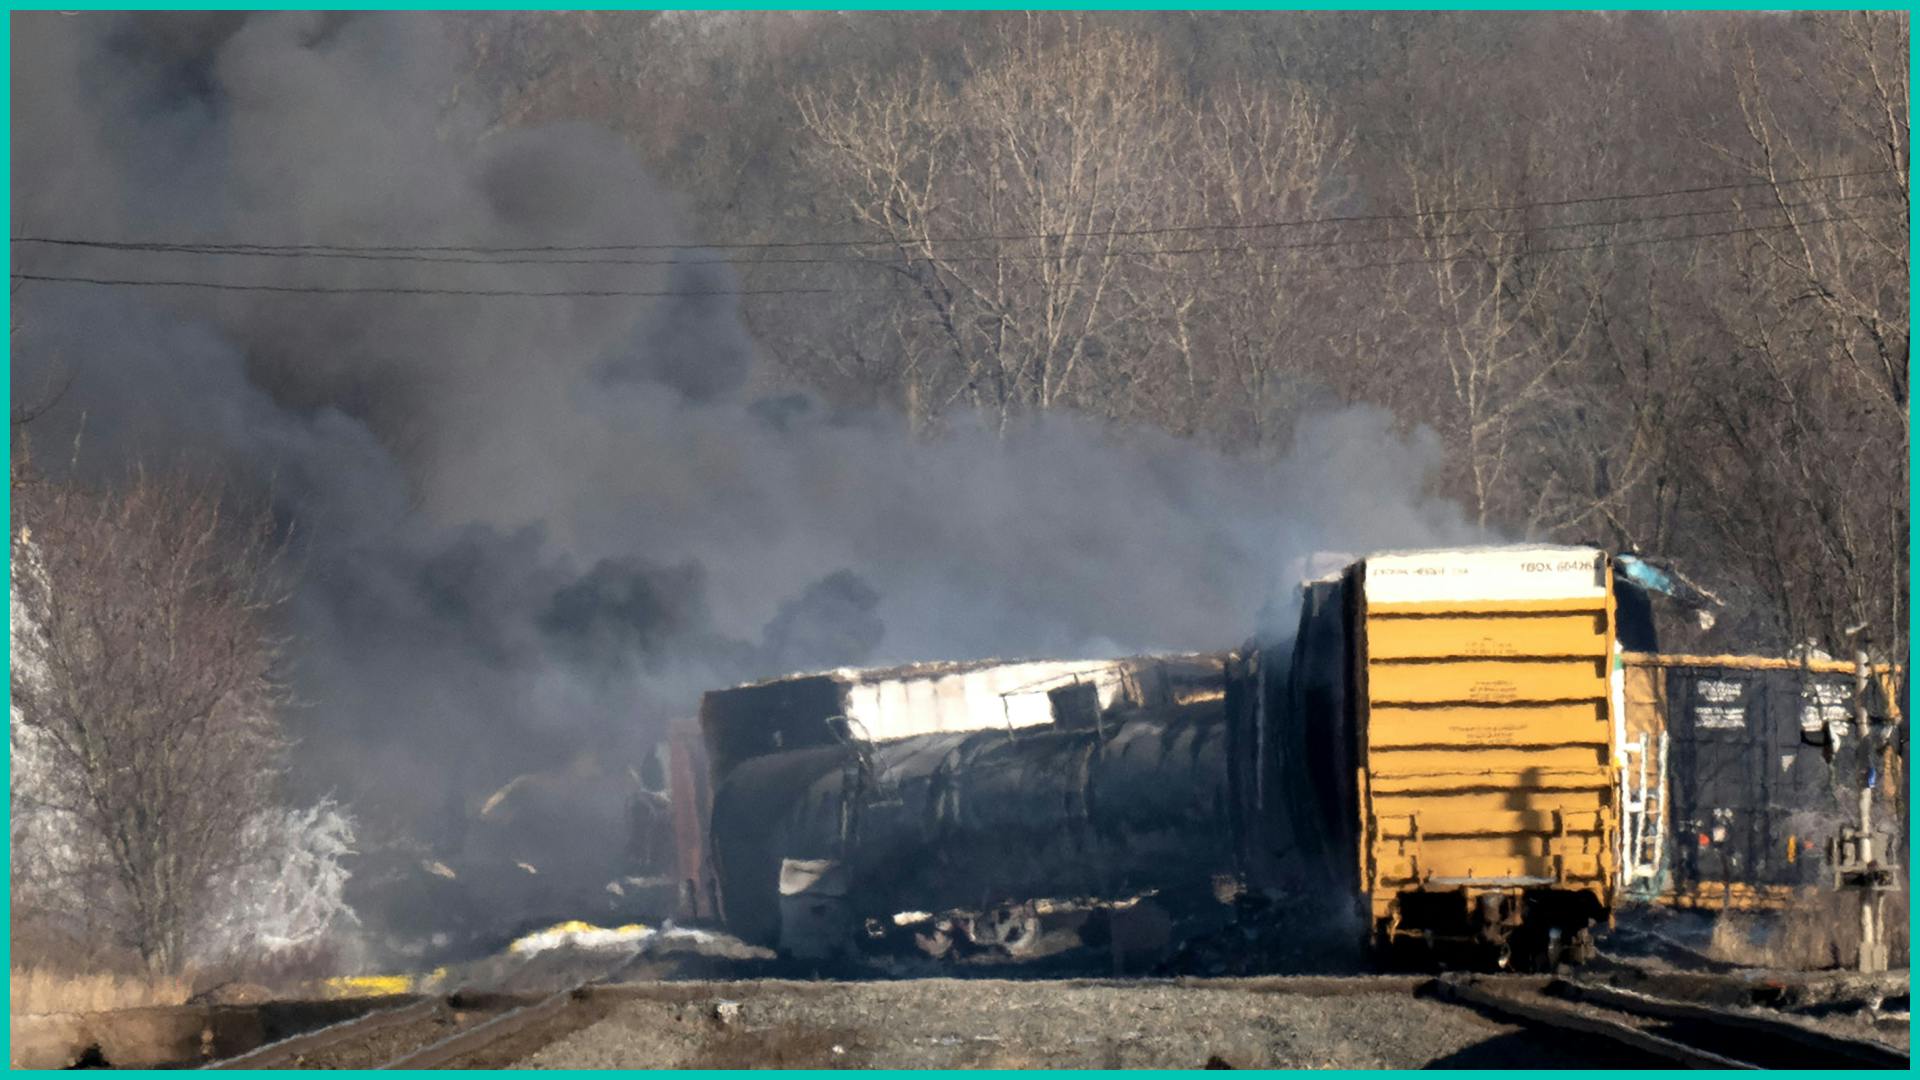 Smoke rises from a derailed cargo train in East Palestine, Ohio, on February 4, 2023.